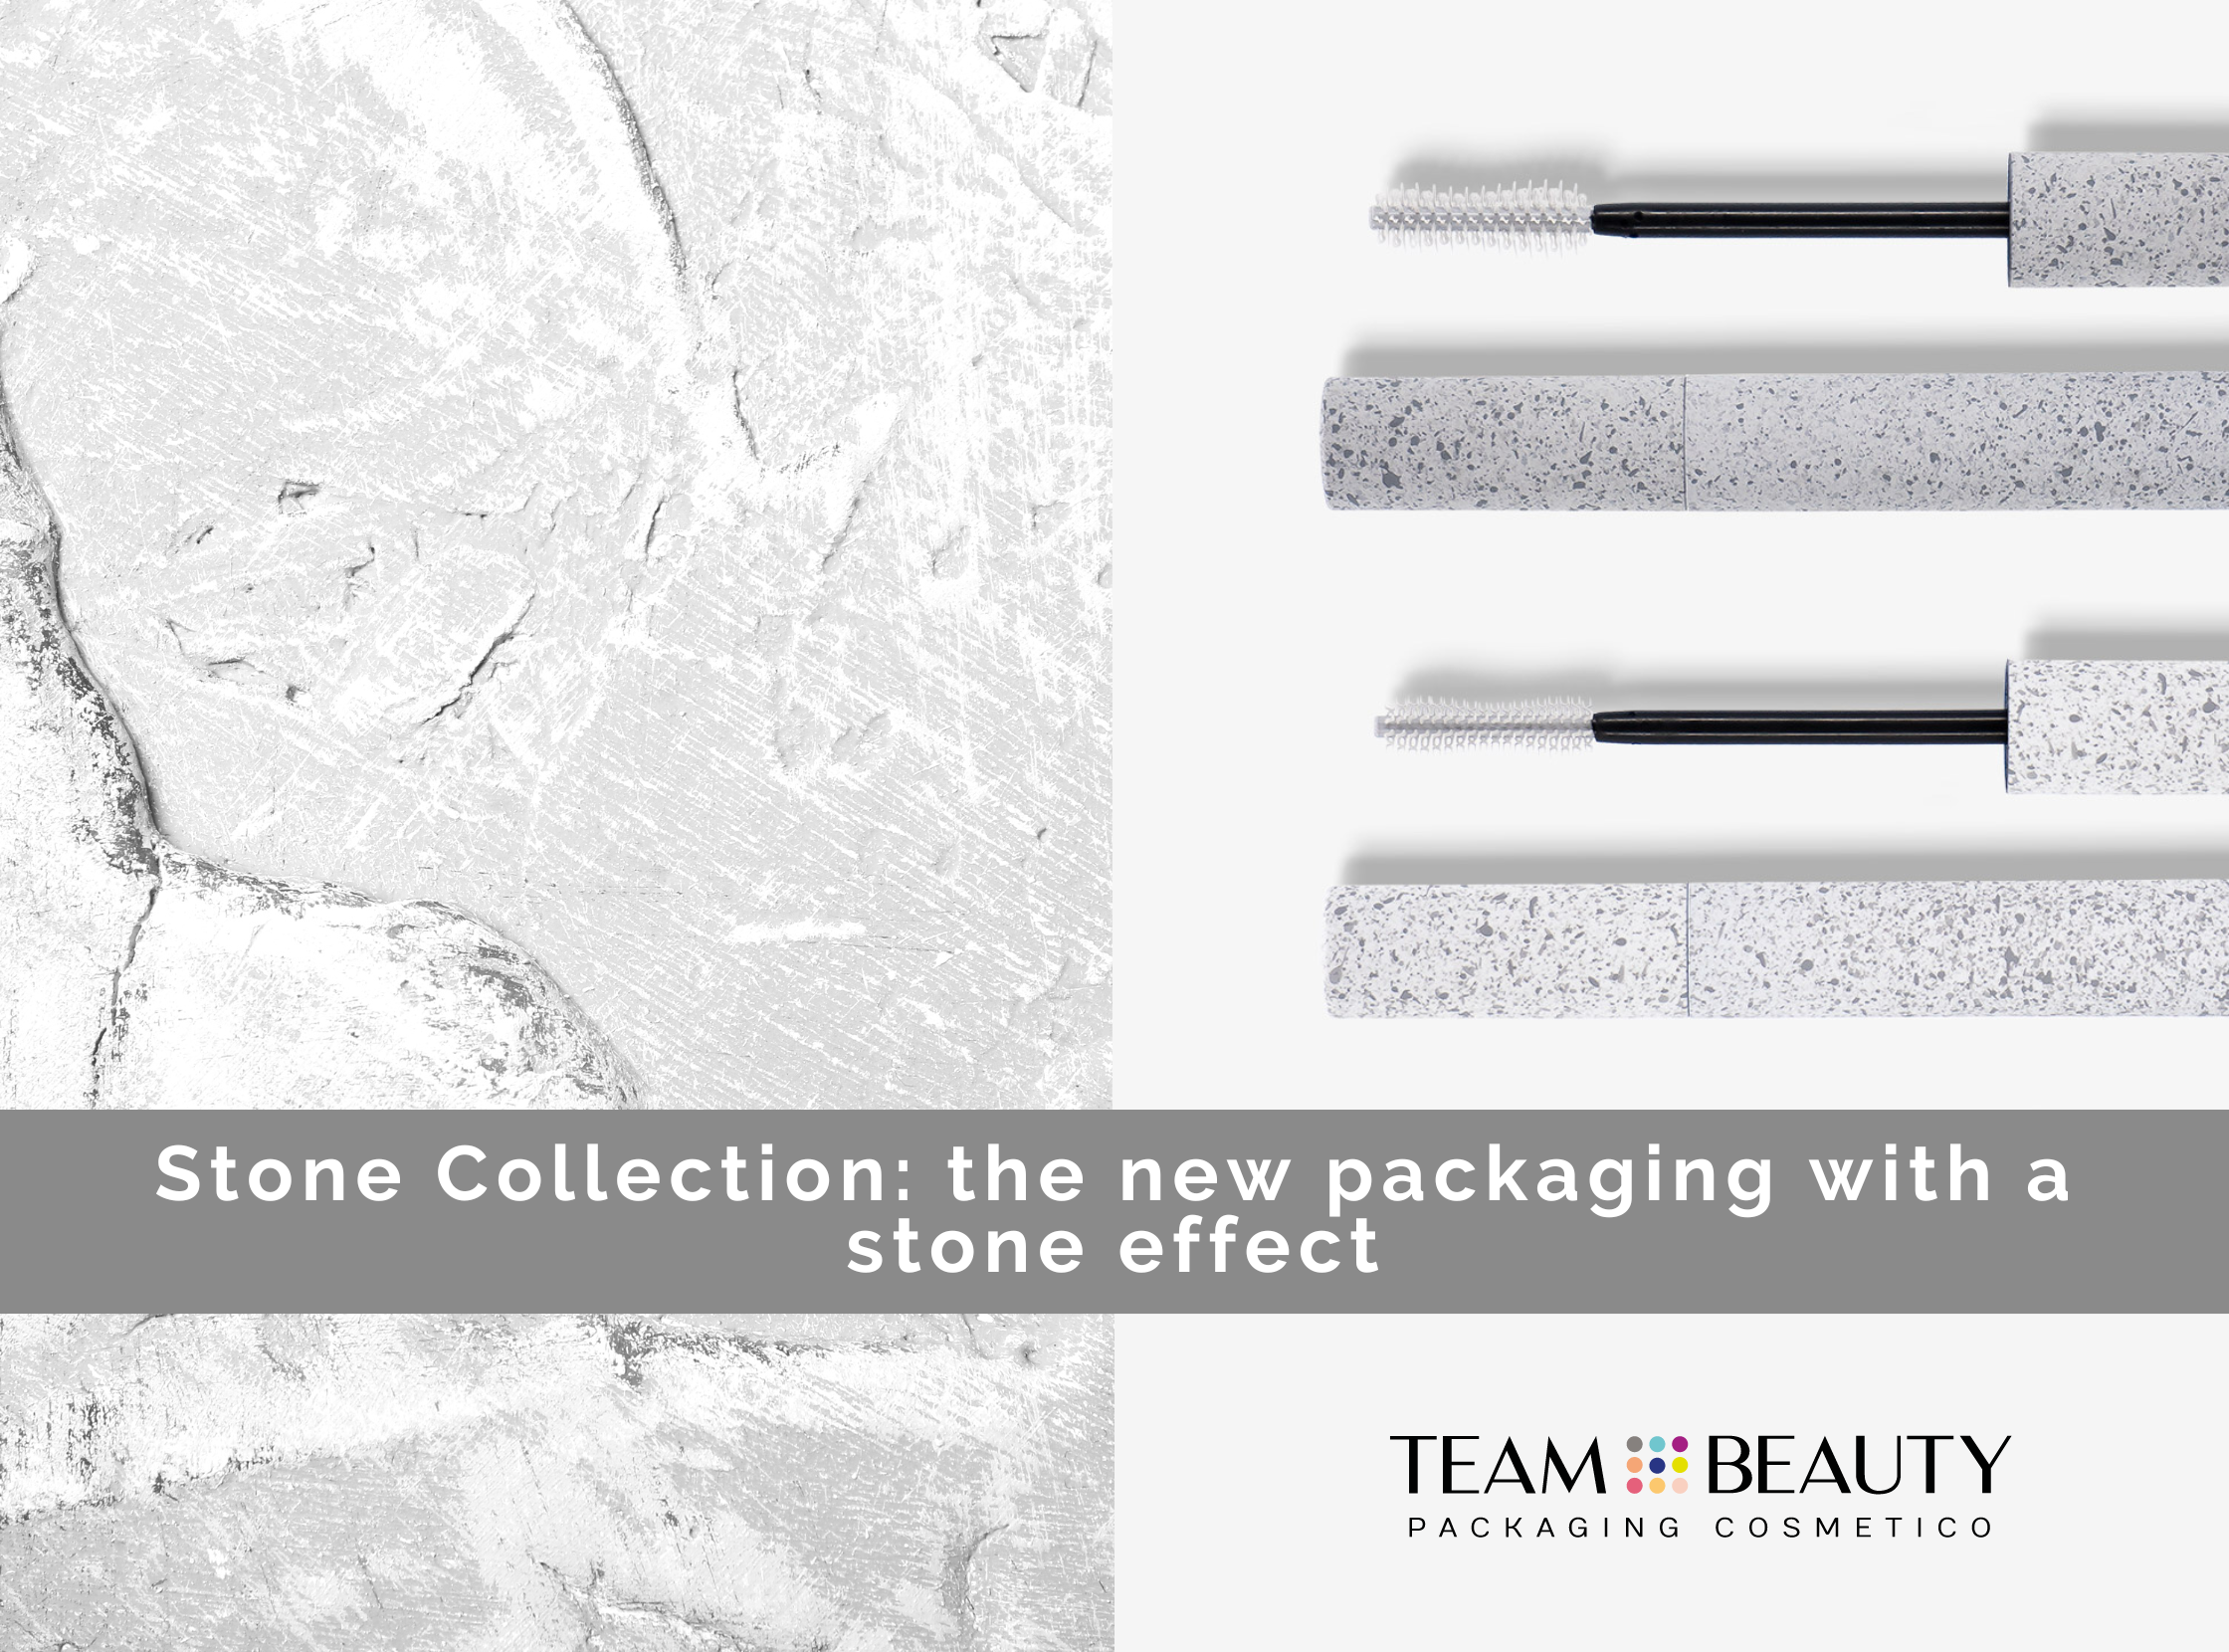 Stone Collection: the new packaging with a stone effect